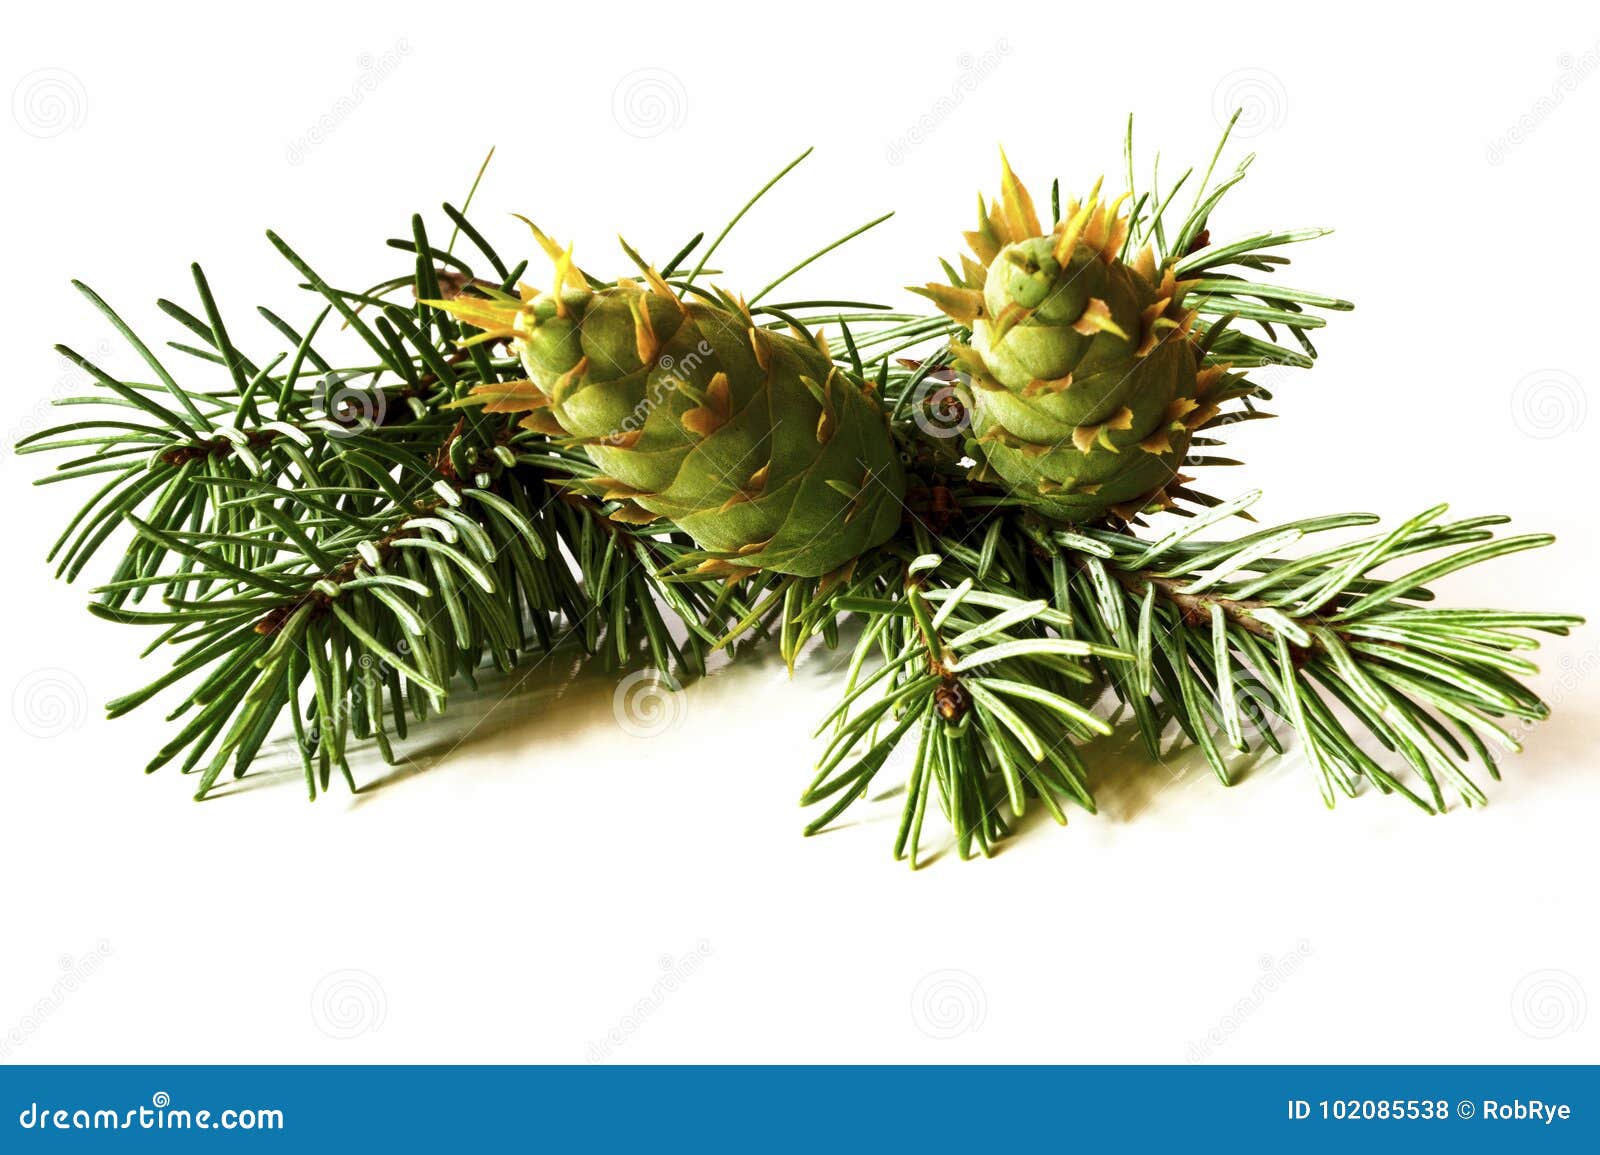 Christmas Decoration - Bunch Of Douglas Fir Tree With Cones Isol Stock